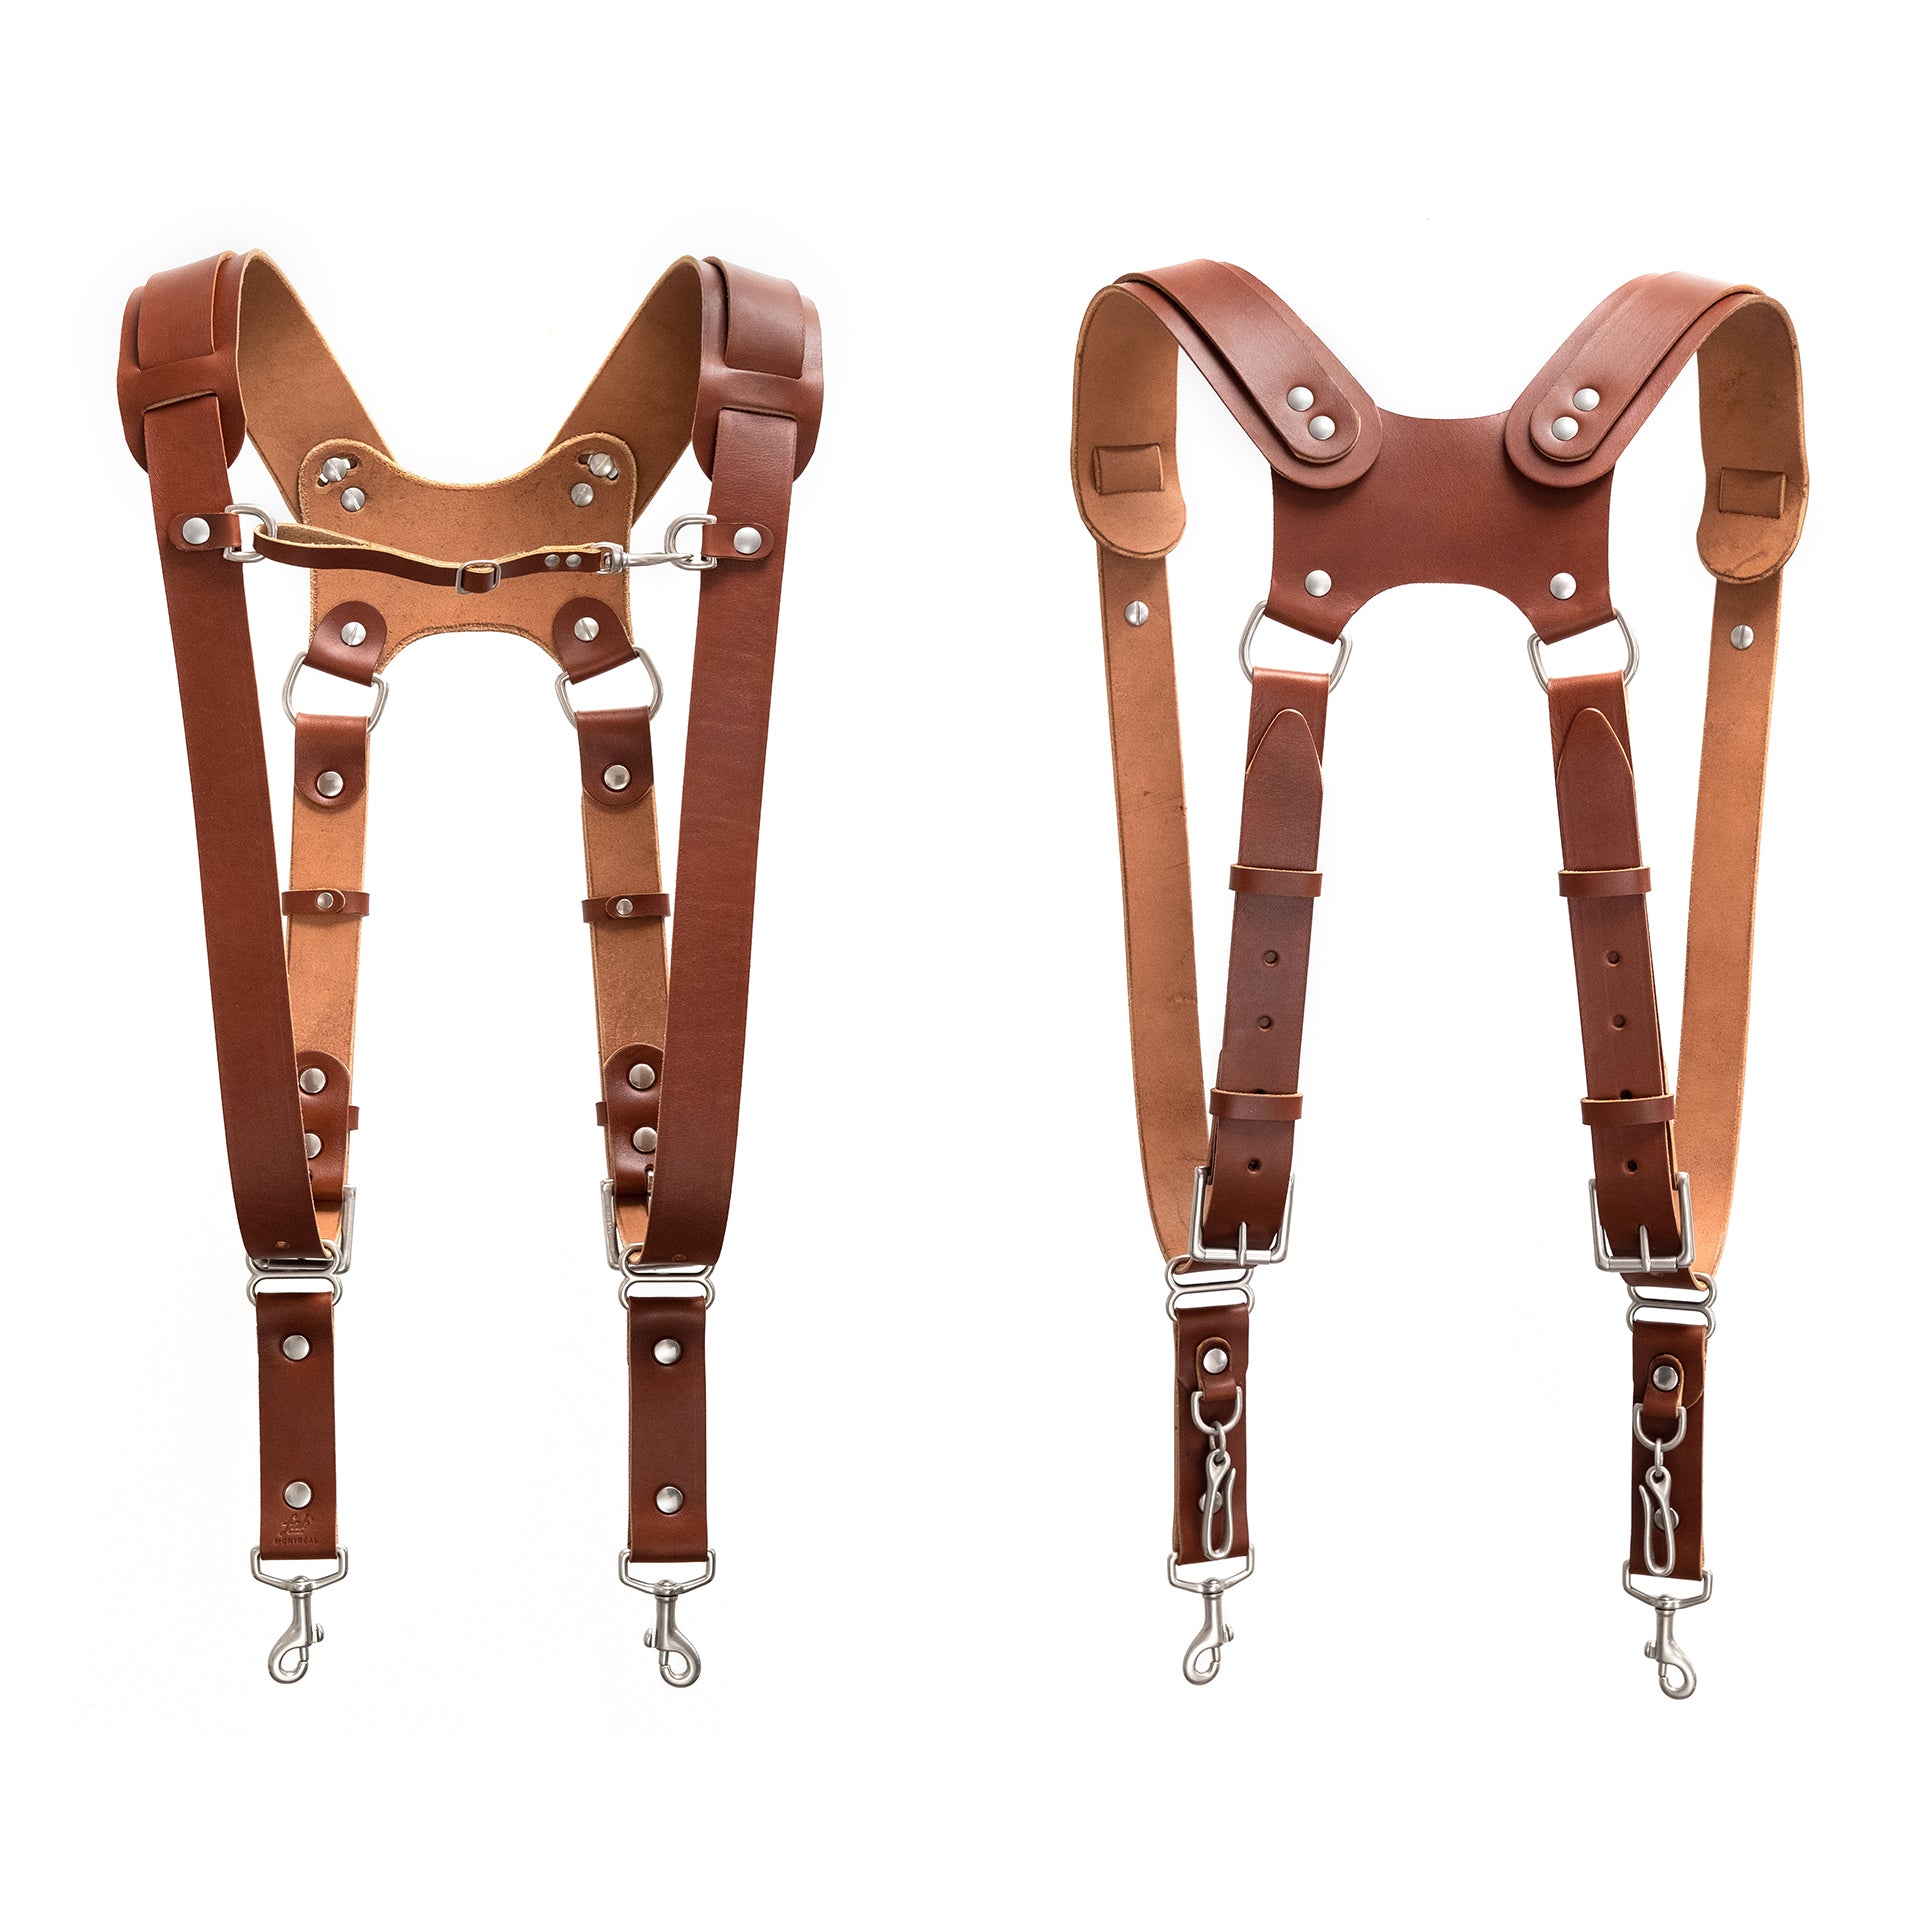 Fab' F22 harness - Brown leather - Size XS